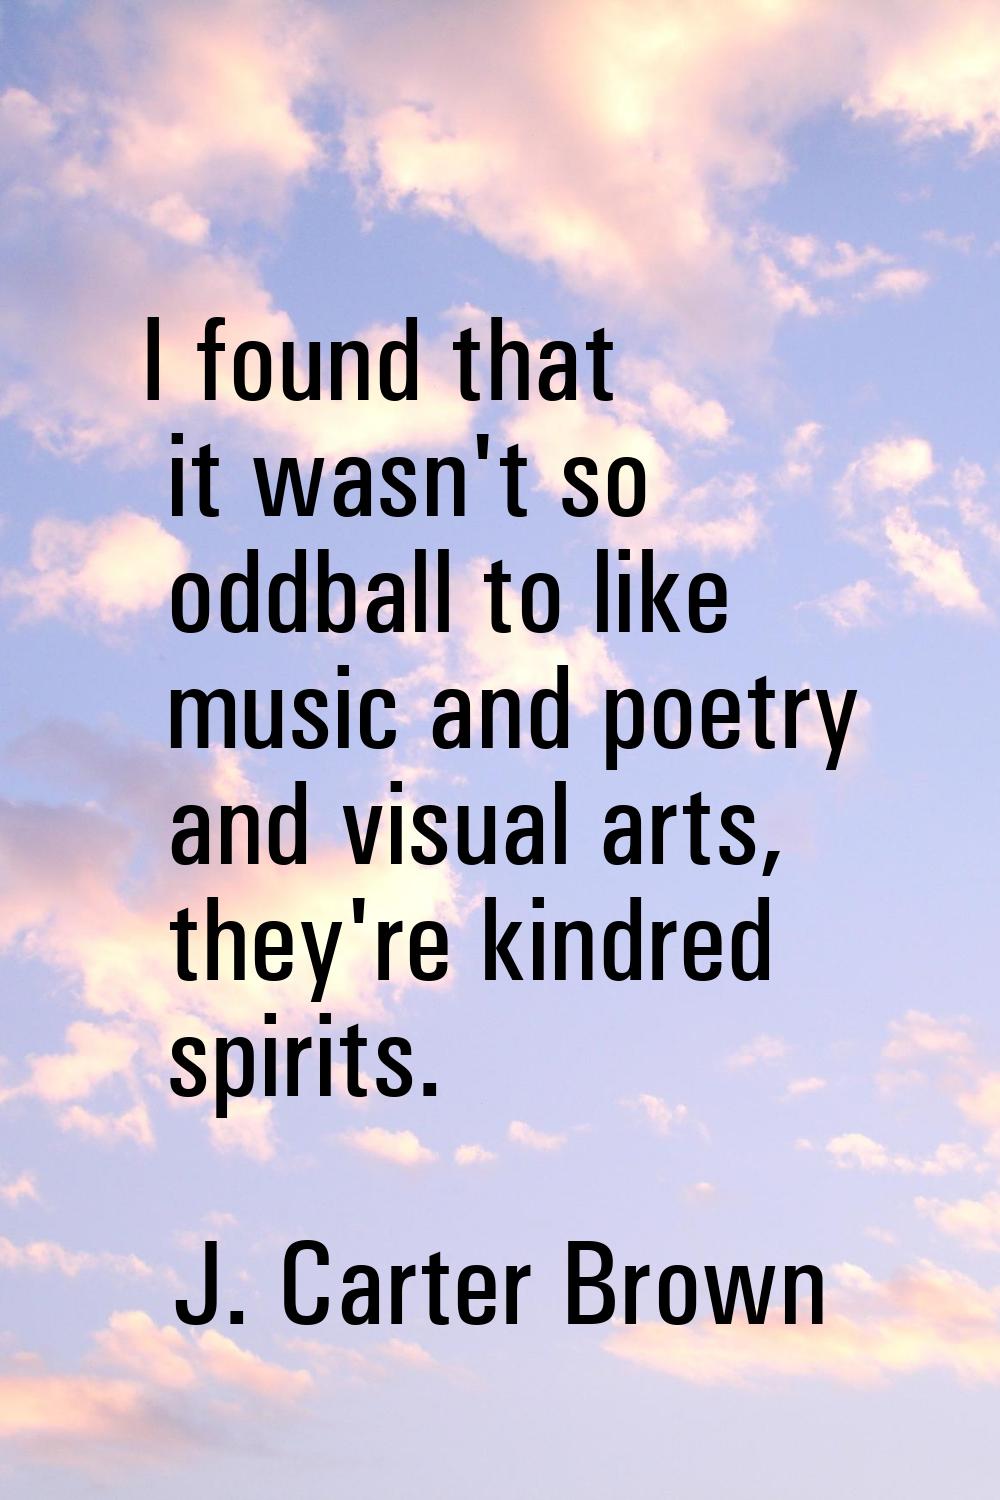 I found that it wasn't so oddball to like music and poetry and visual arts, they're kindred spirits